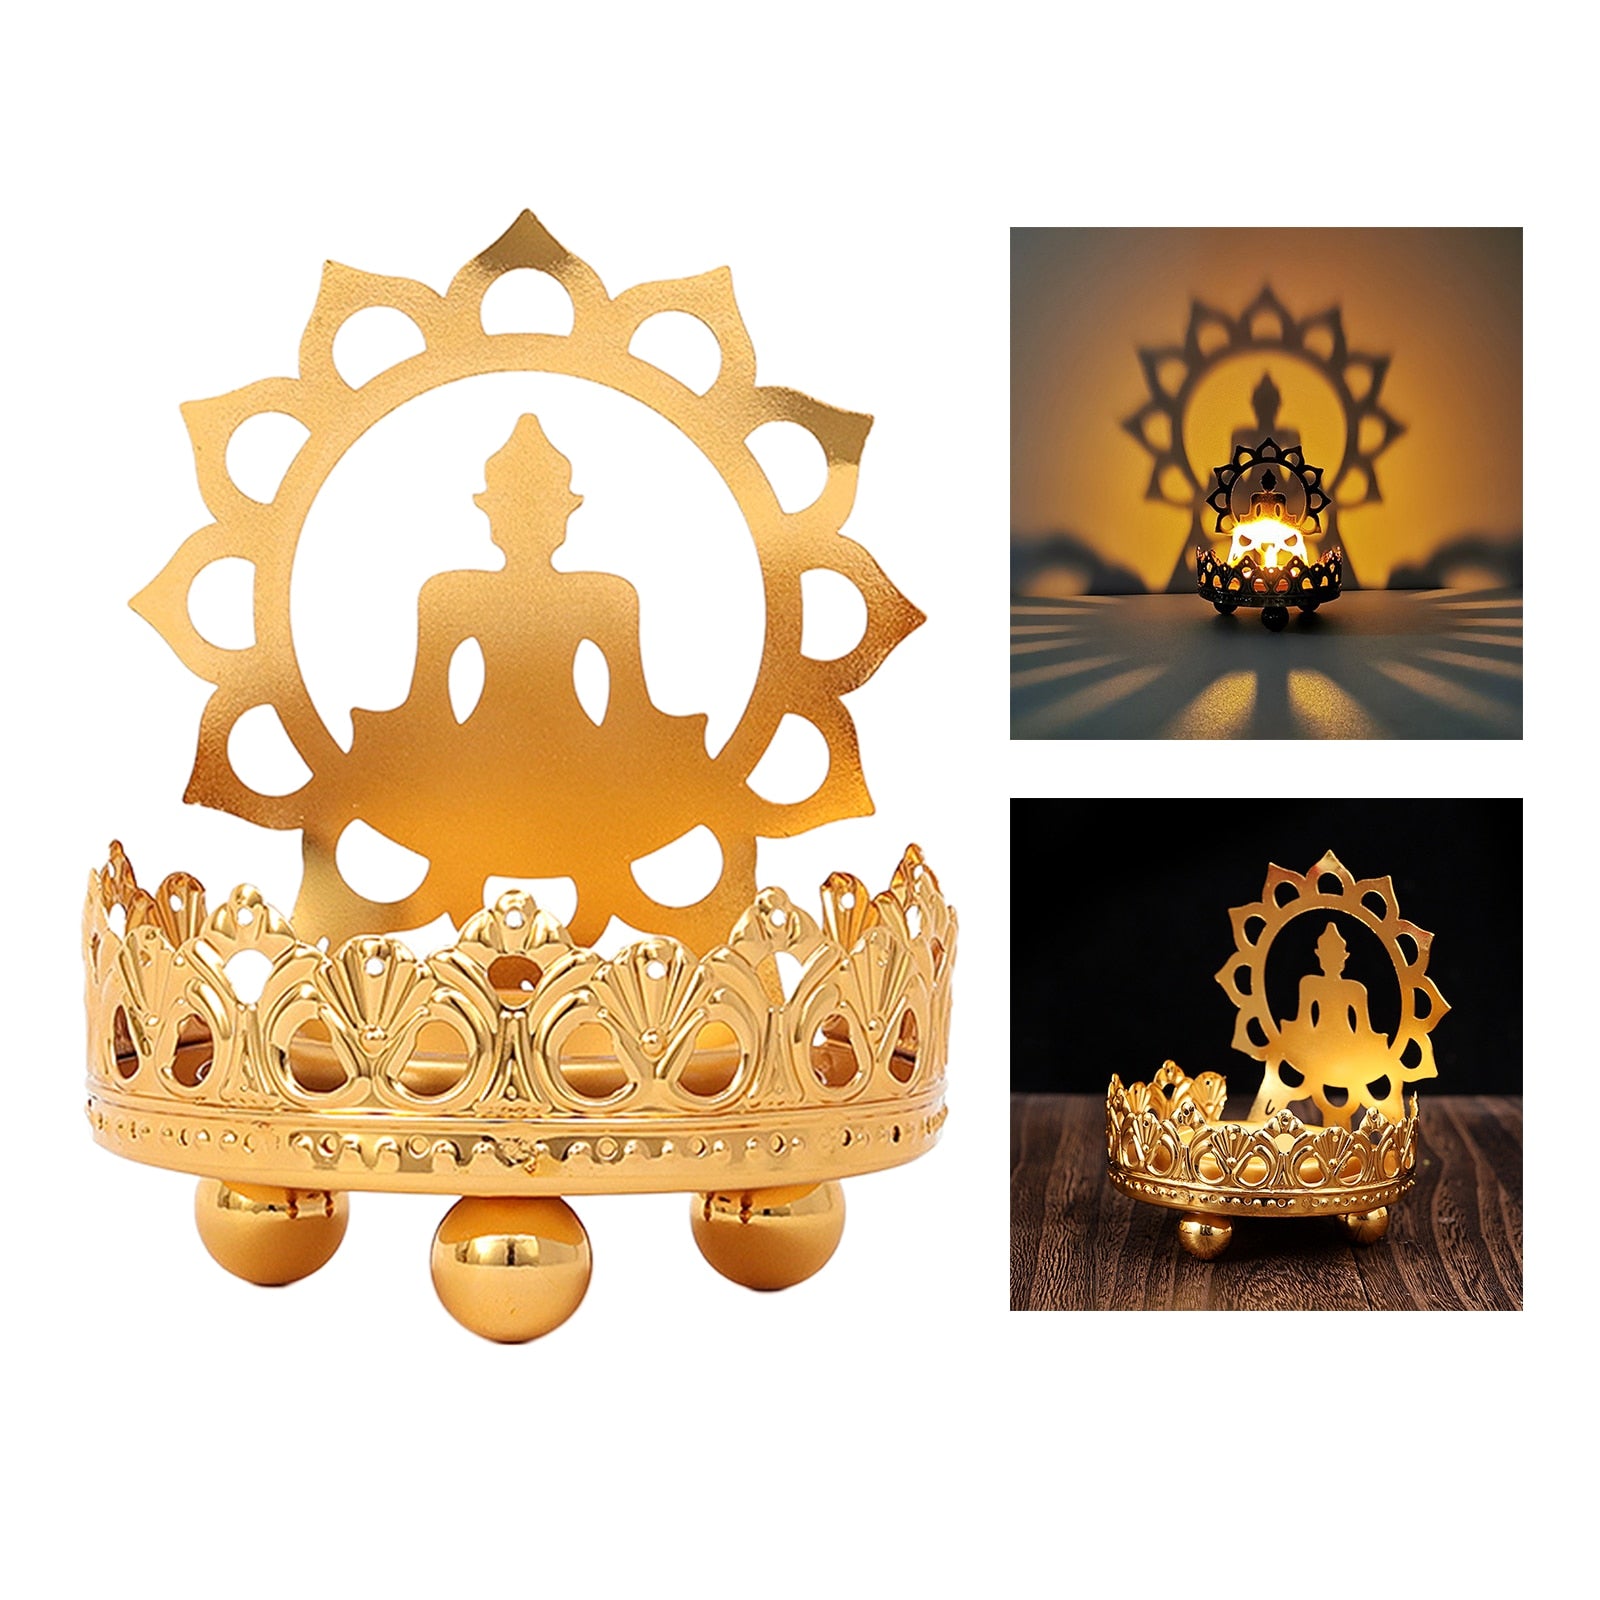 Alloy Hollow Carved Tea-light Candle Holder Buddha Ghee Lamp Holder -Eco-Friendly Zen Decor Ideas - Personal Hour for Yoga and Meditations 